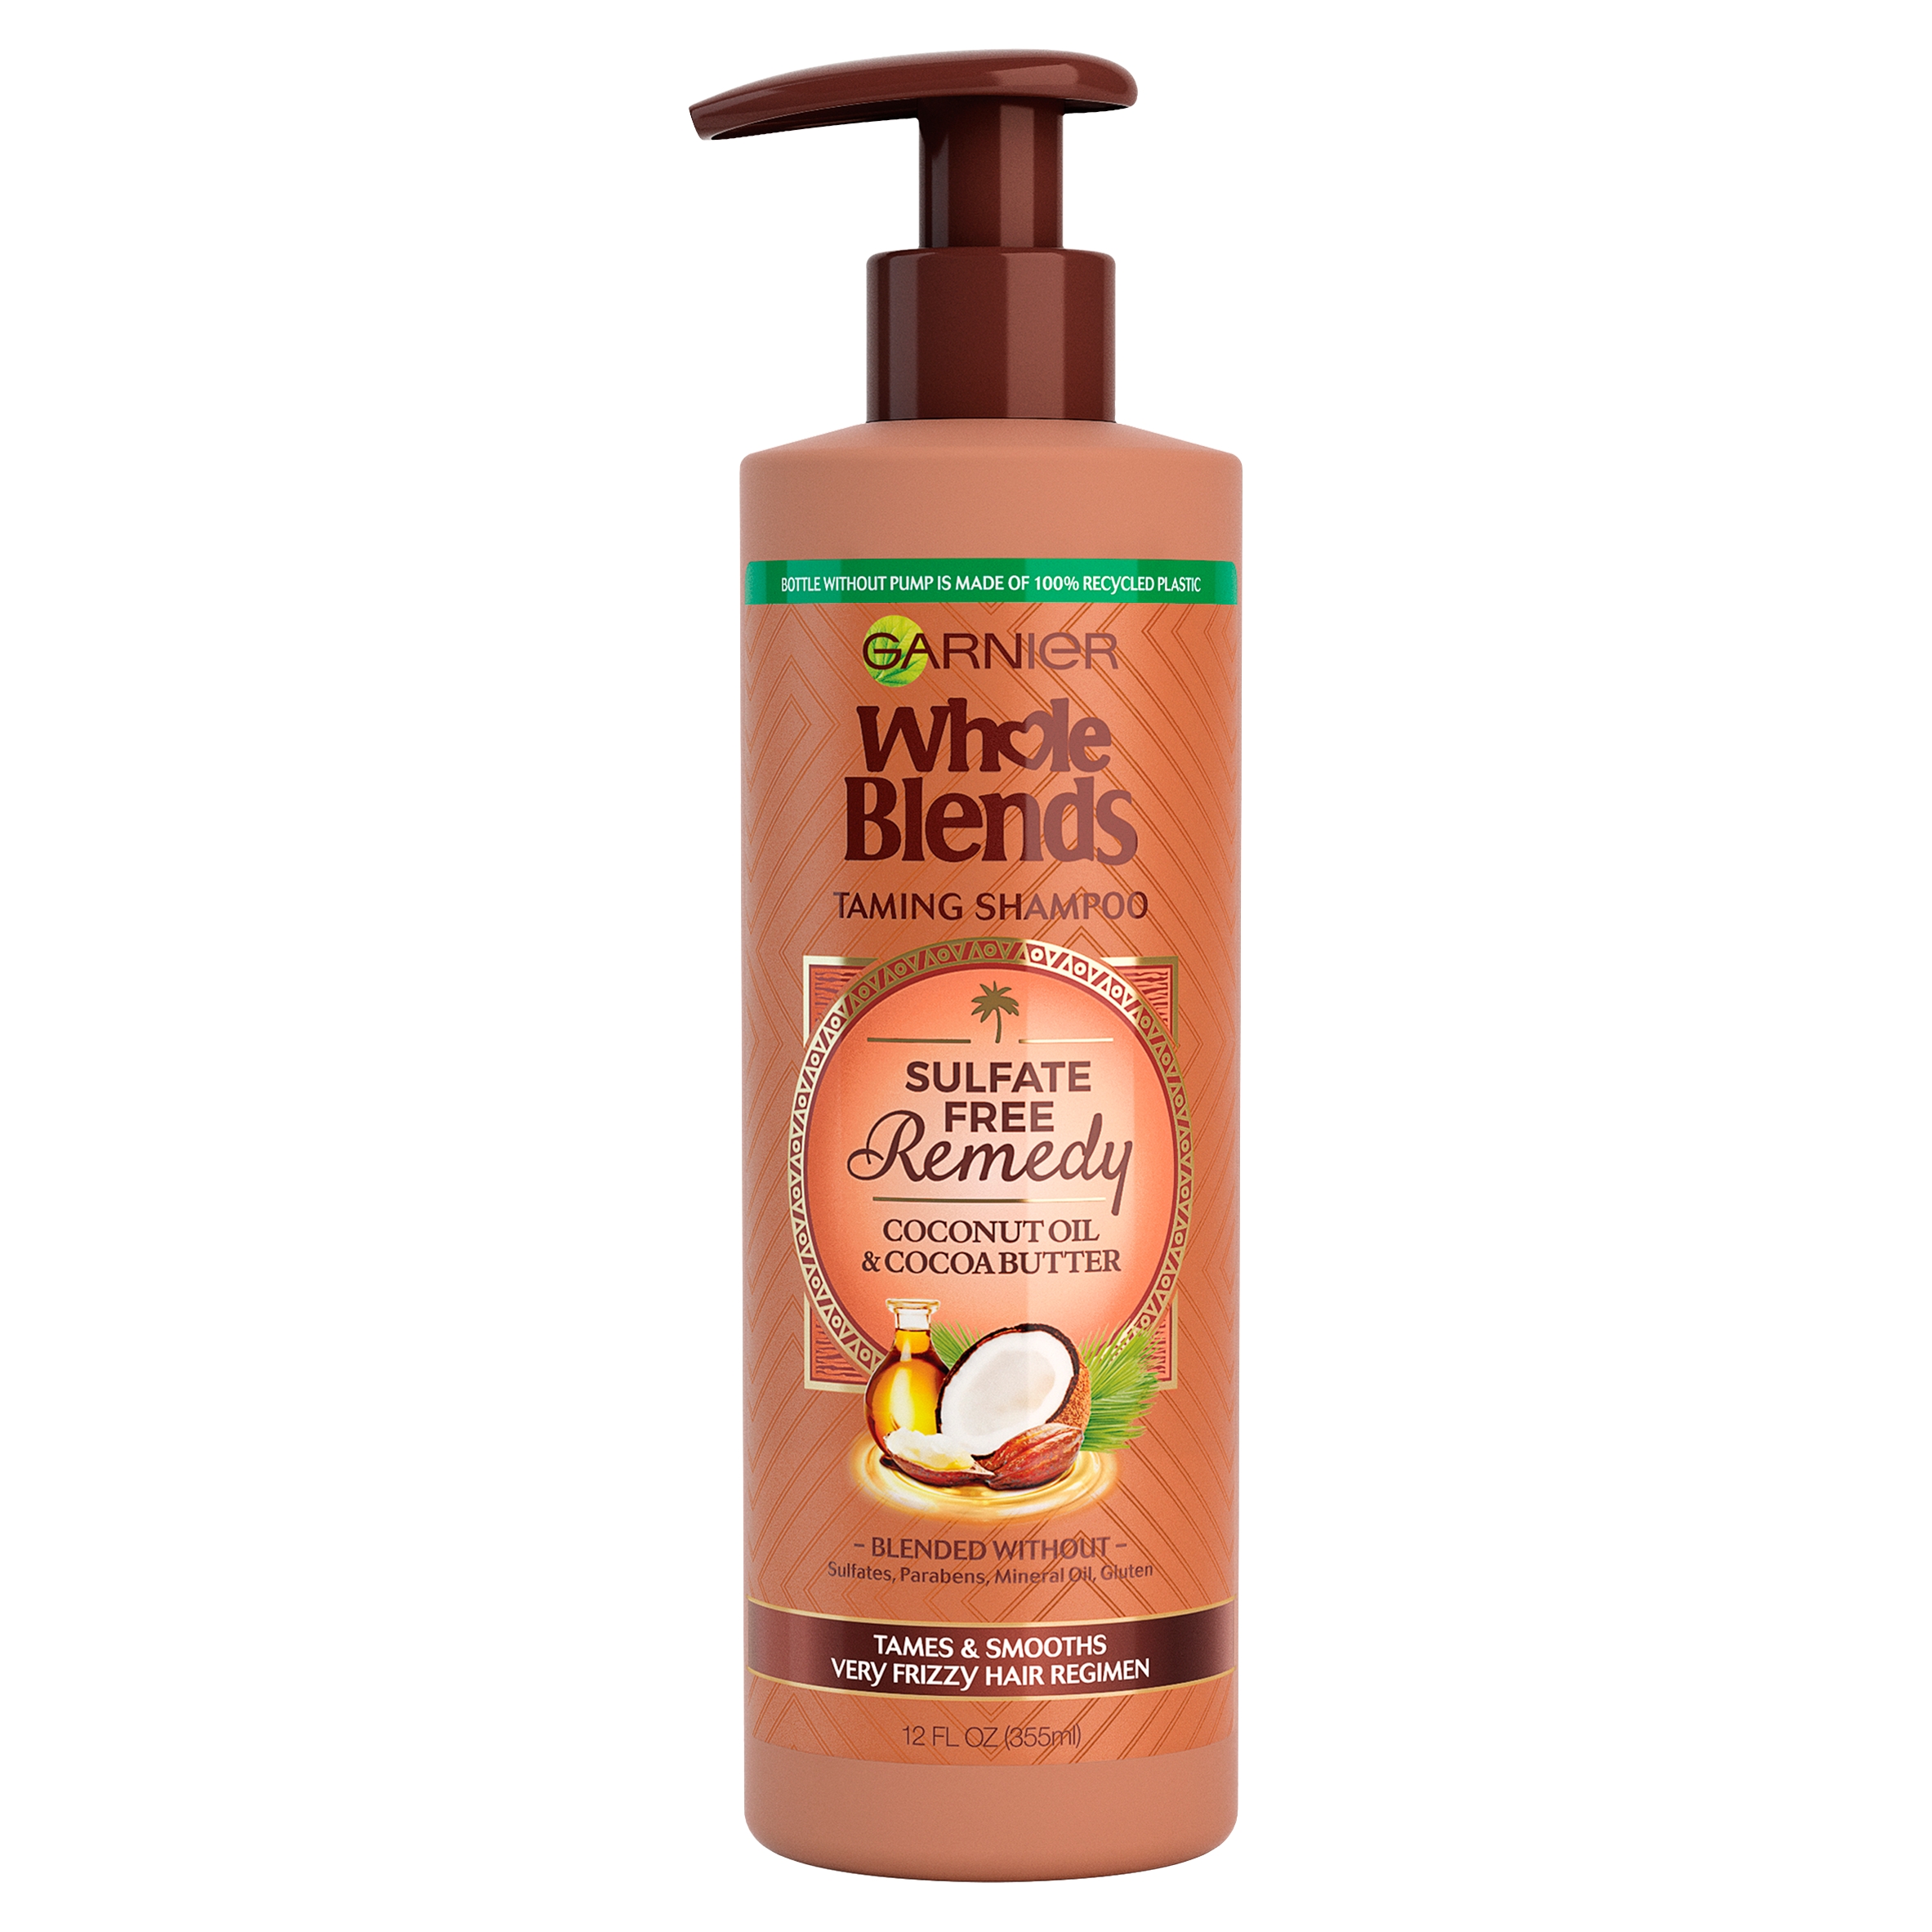 Garnier Whole Blends Taming Shampoo with Coconut Oil Cocoa Butter, 12 fl oz - image 1 of 11